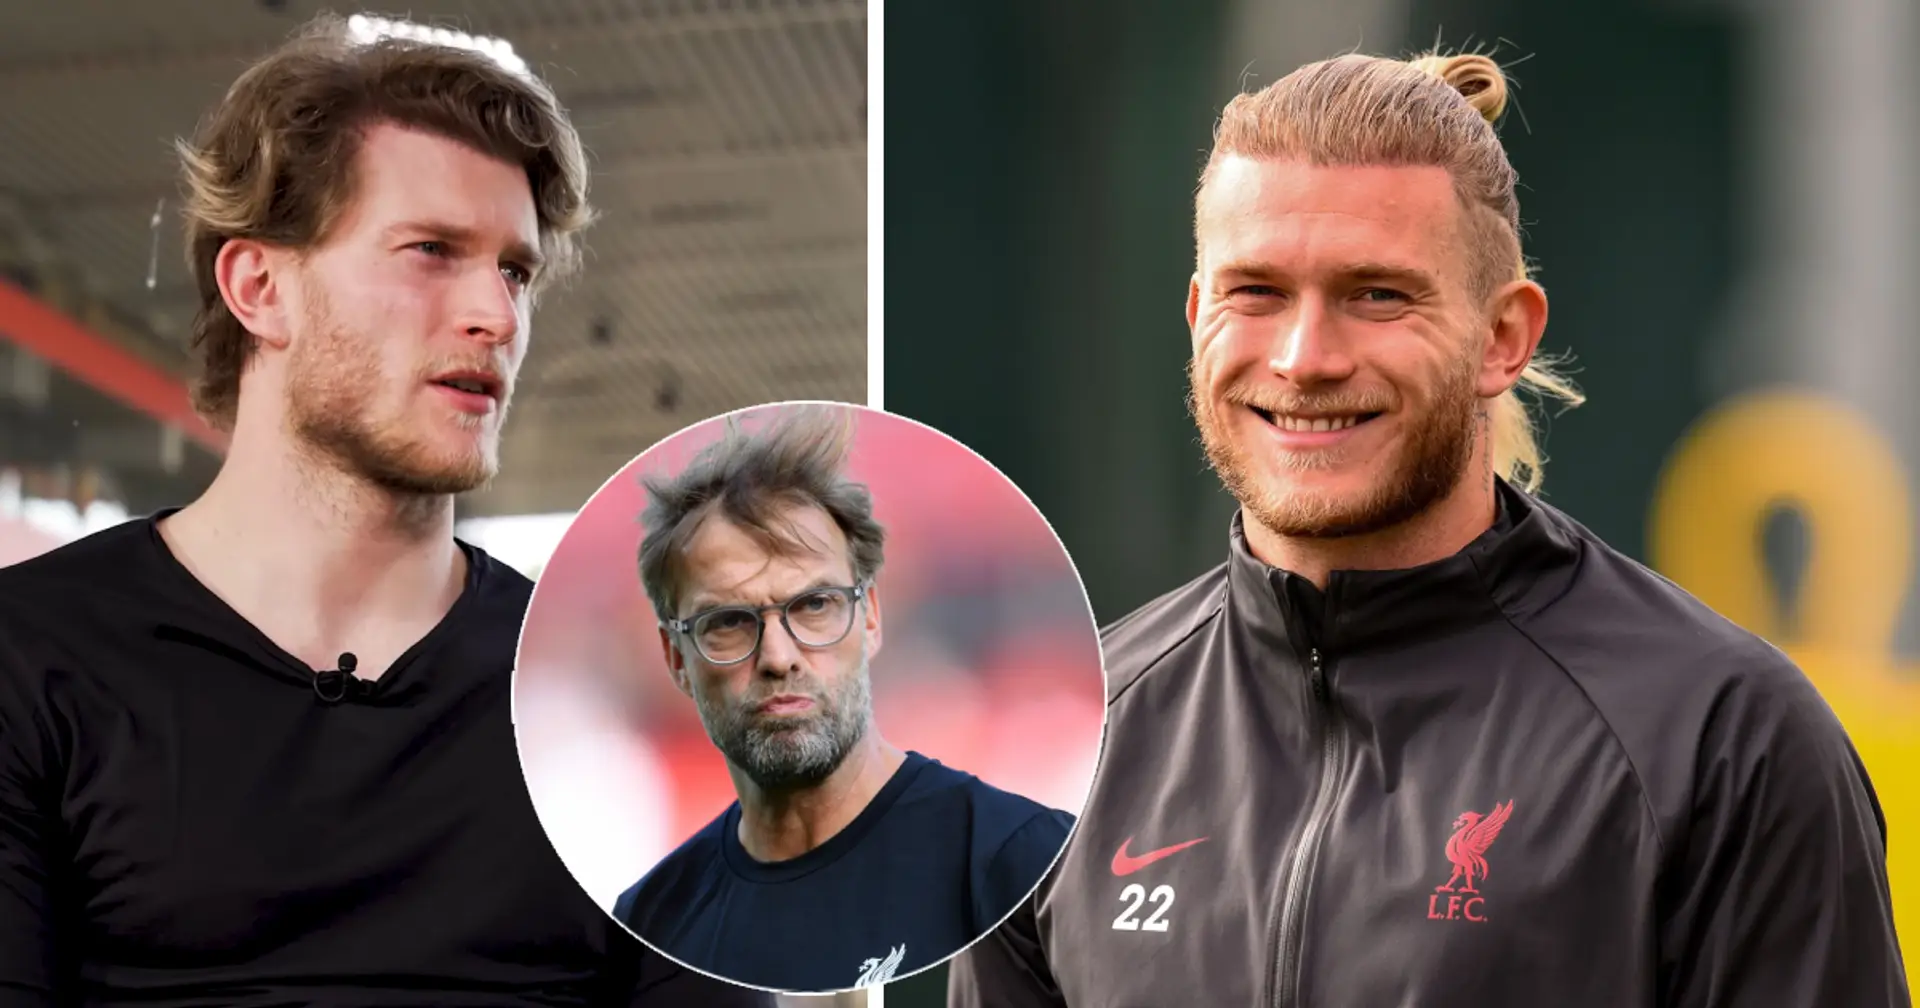 'I want to prove something to the people': Karius opens up on his conditioning and future plans